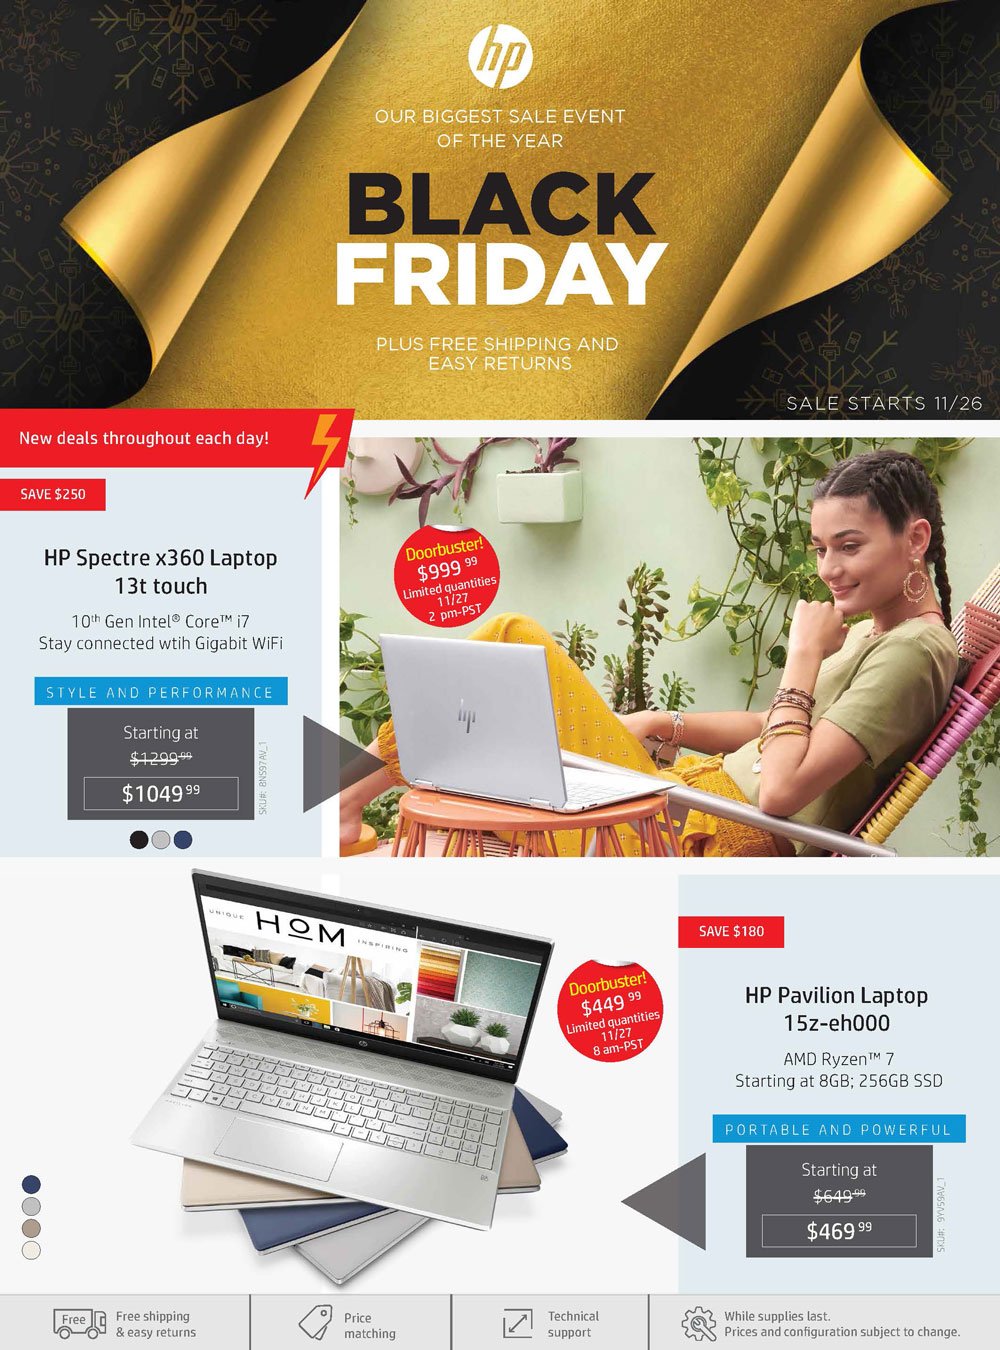 HP Black Friday 2021 Ad - Savings.com - What Is Shutterfly Black Friday Deals 2021